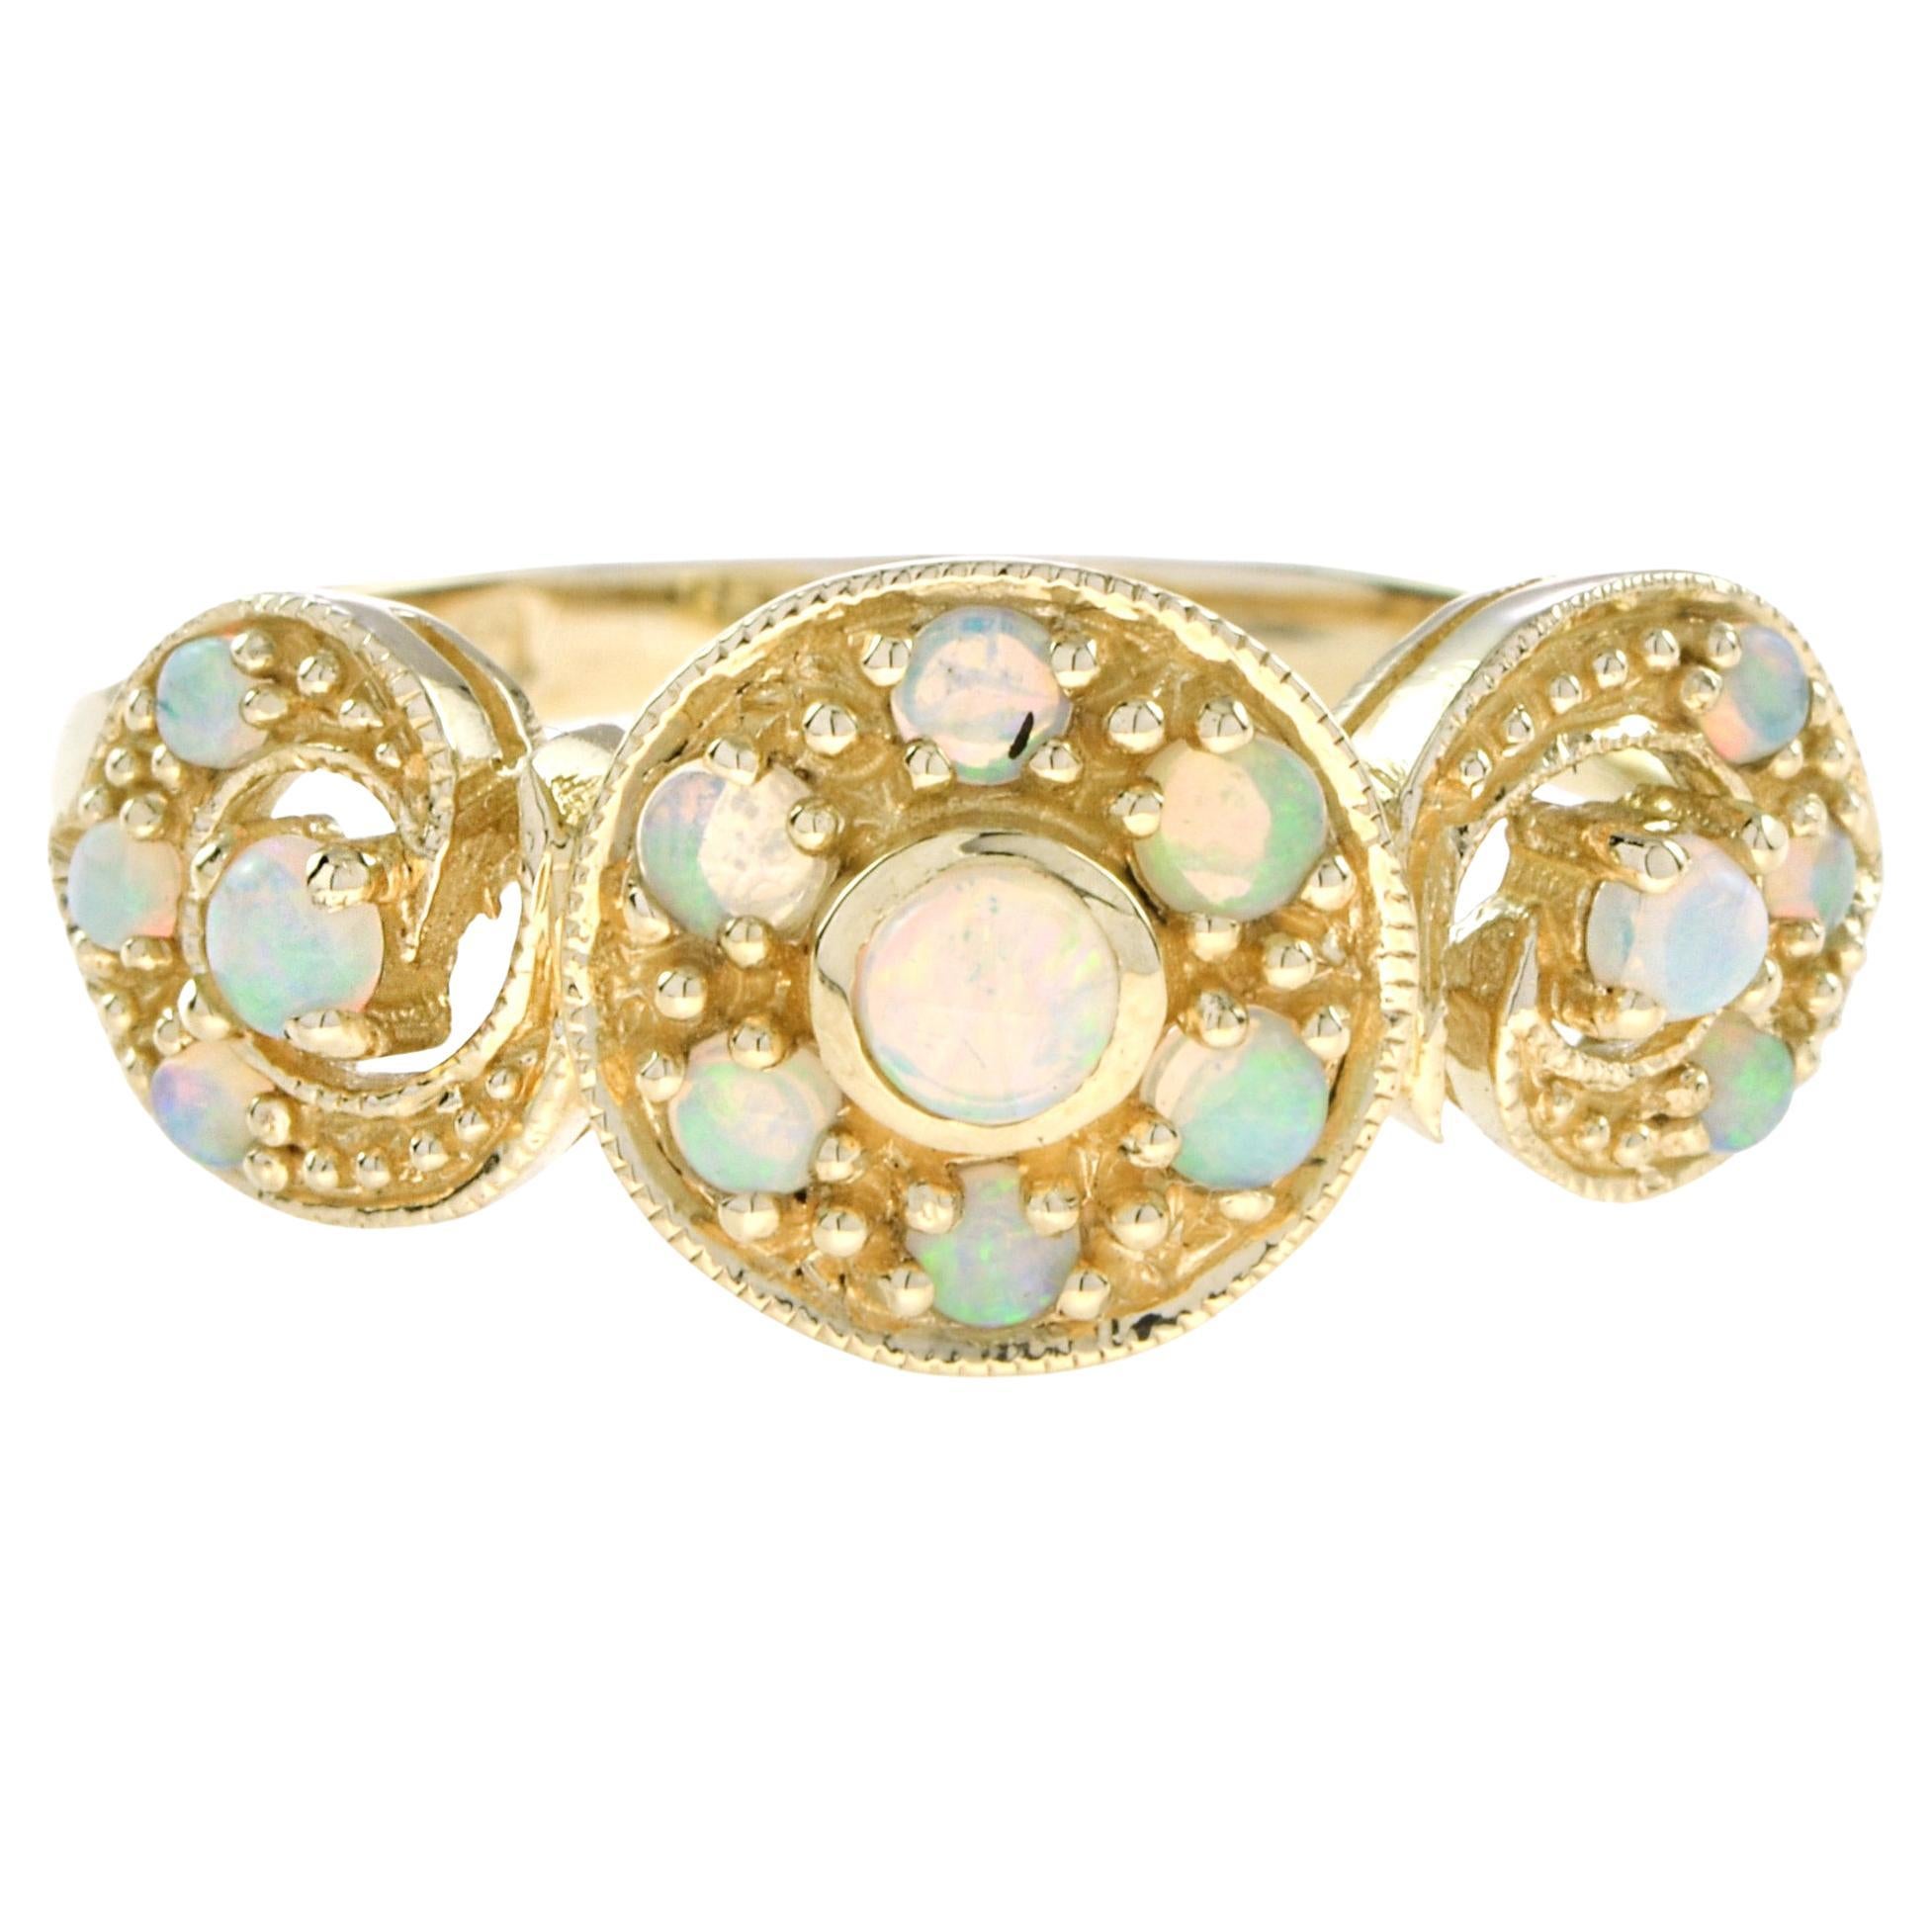 Vintage Style Opal Cluster Ring in 14K Yellow Gold